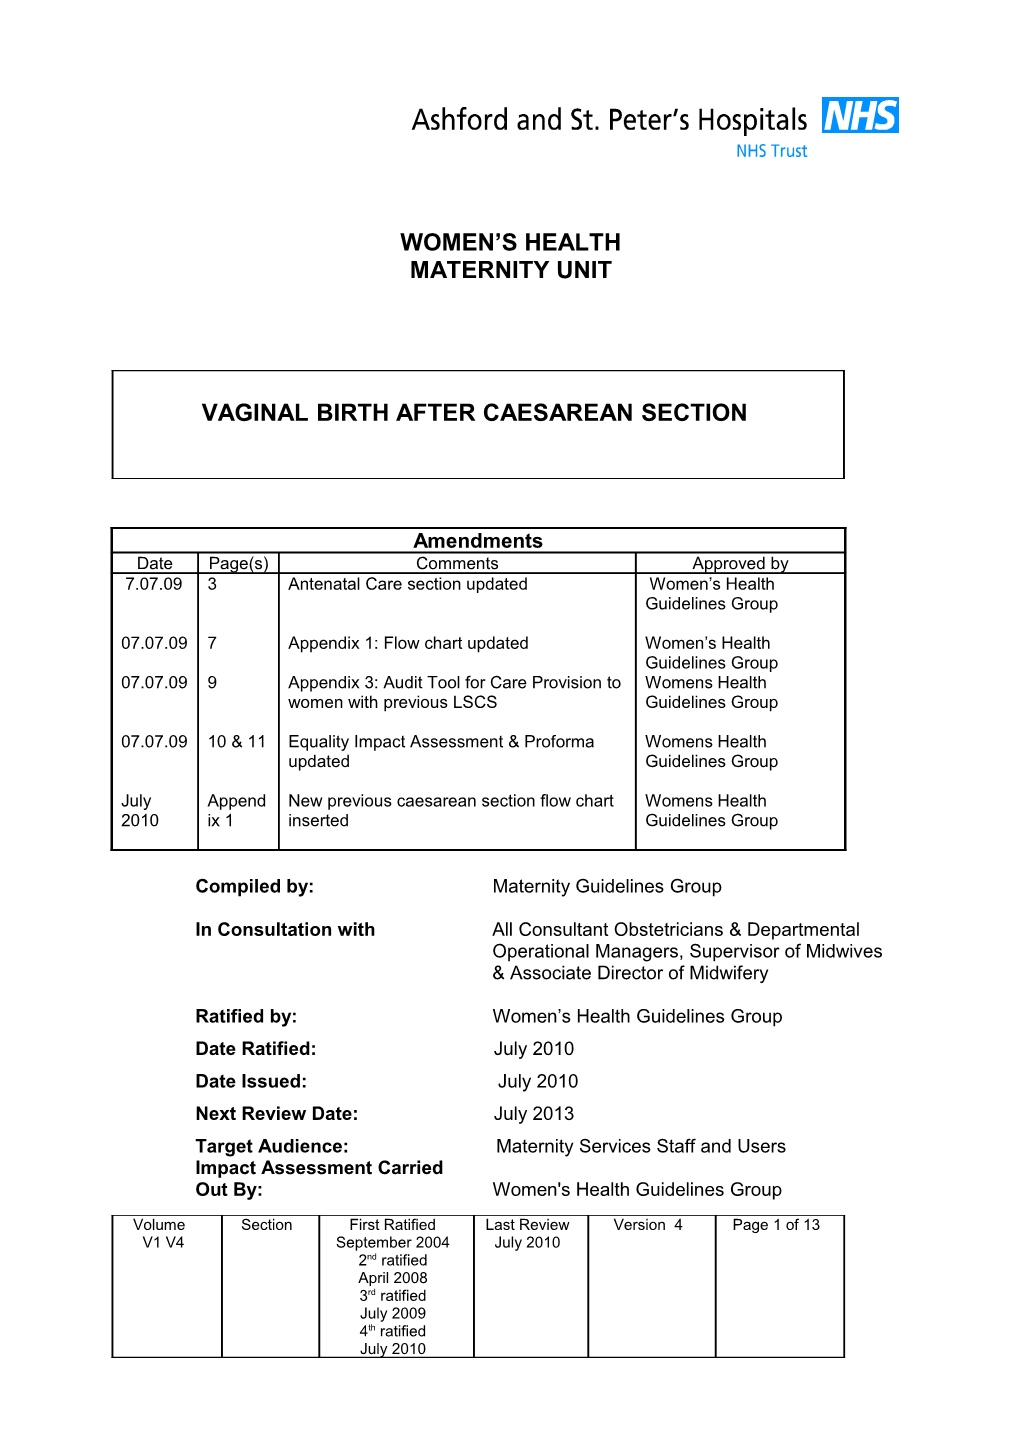 Compiled By: Maternity Guidelines Group